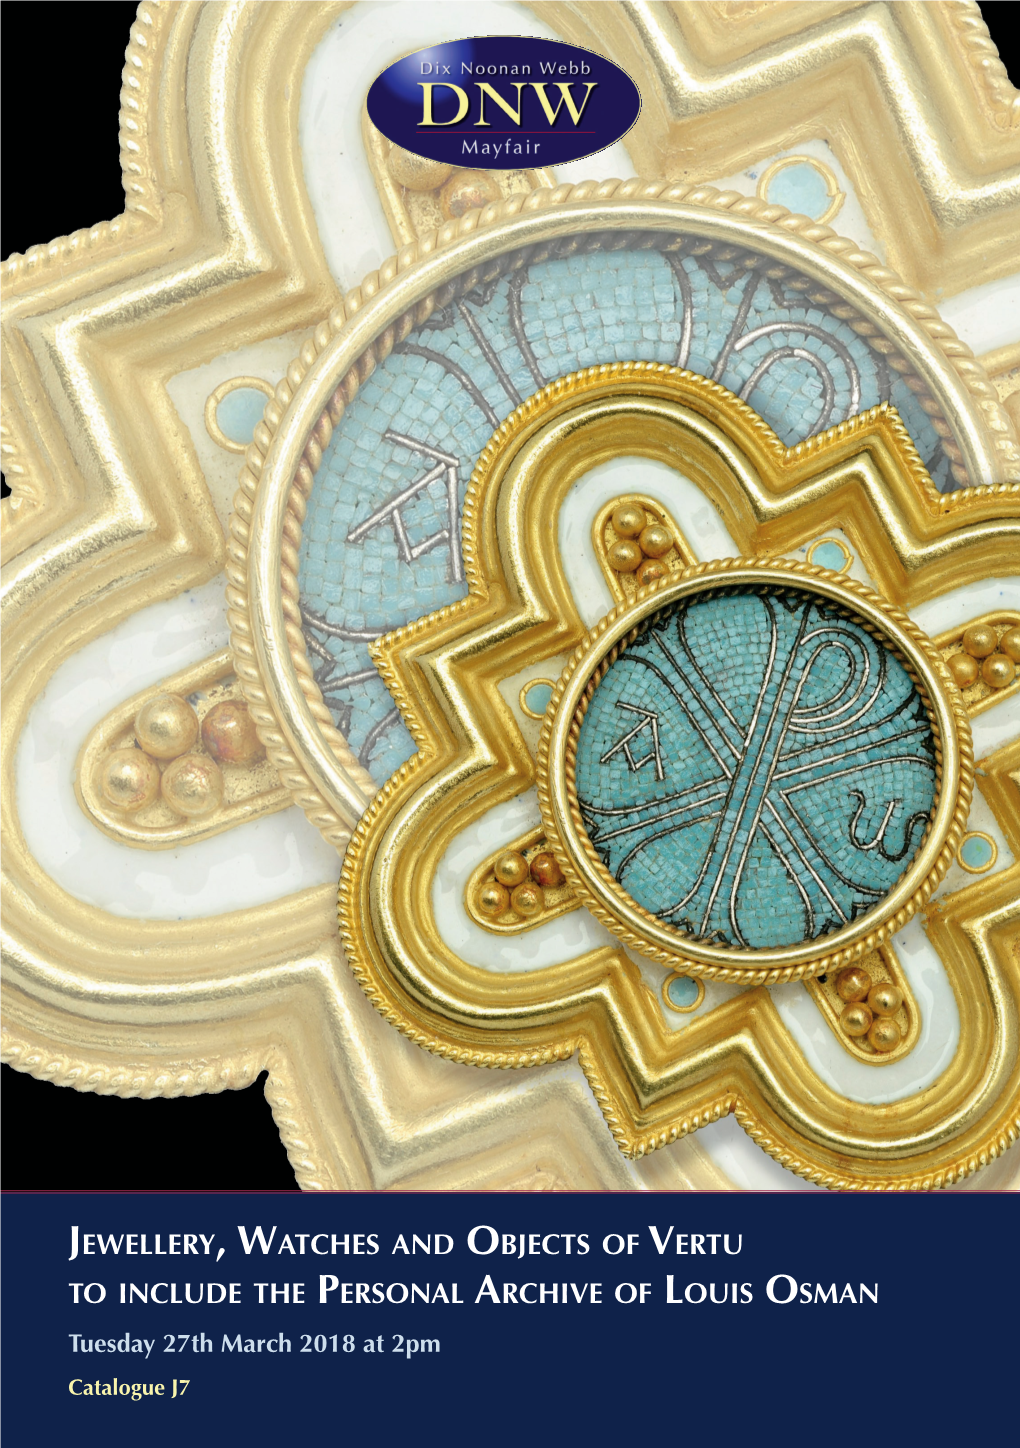 Jewellery, Watches and Objects of Vertu, Archive of Louis Osman 27 March 2018